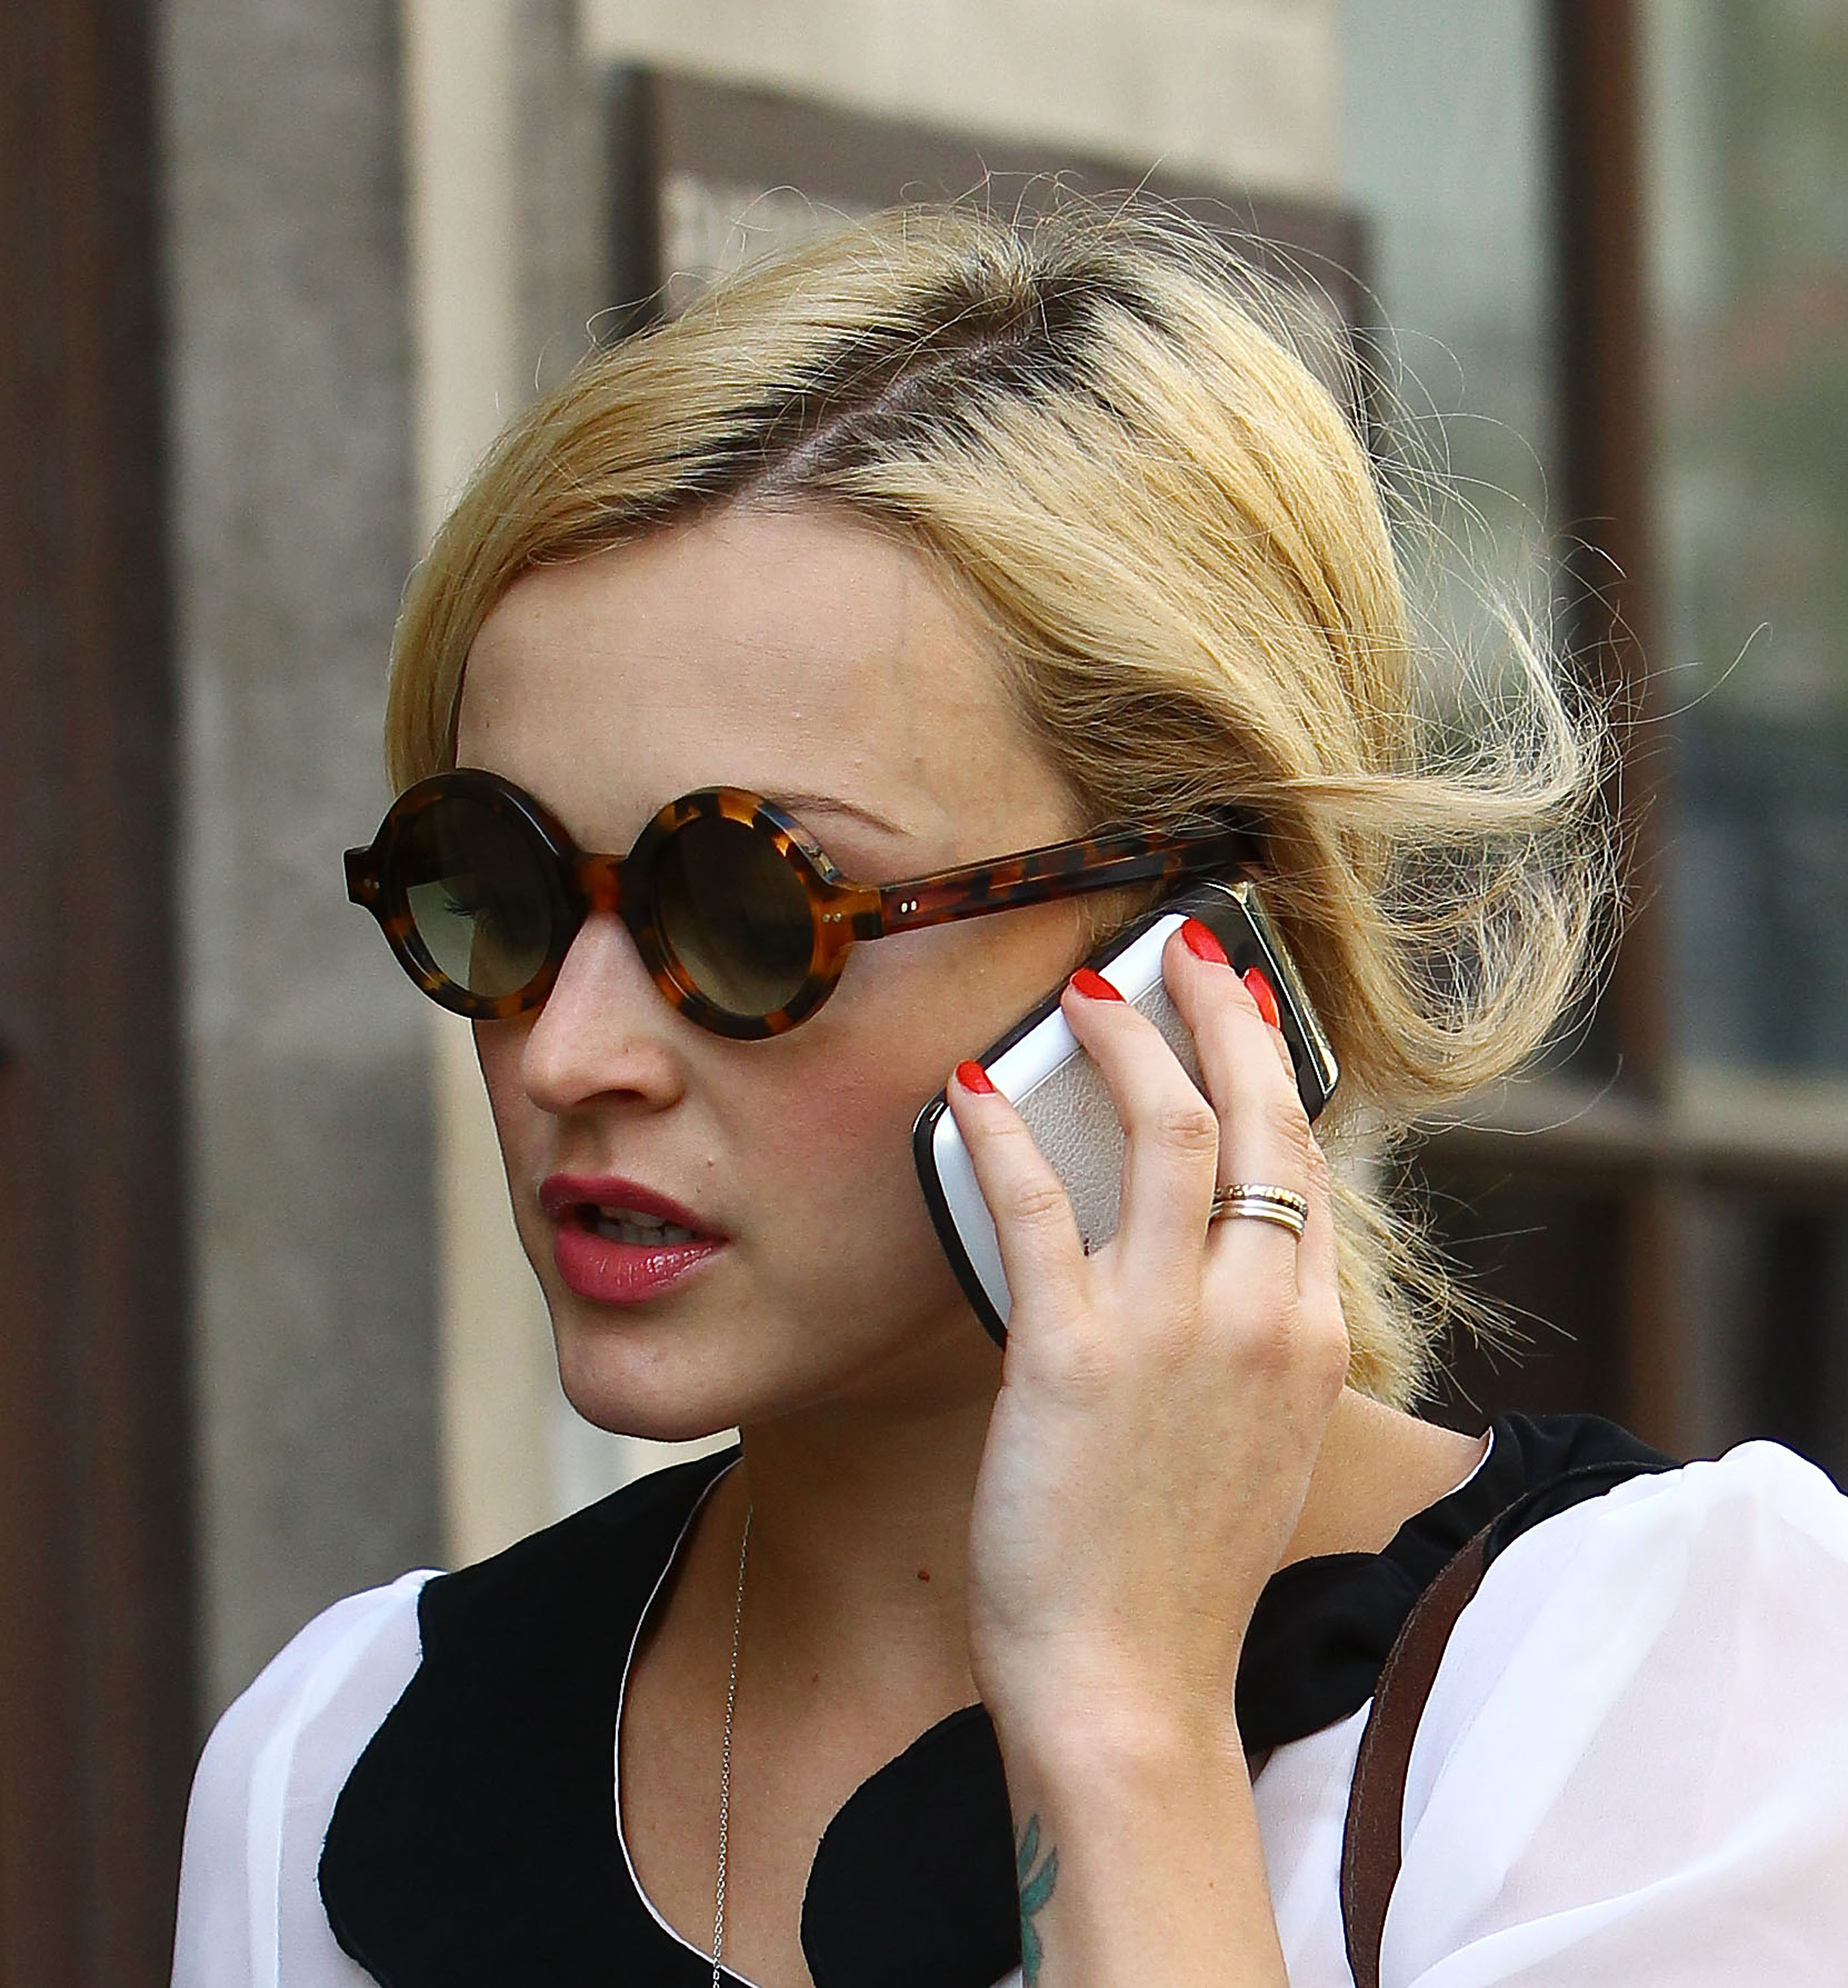 Fearne Cotton arriving at the BBC Radio One studios pictures | Picture 63410